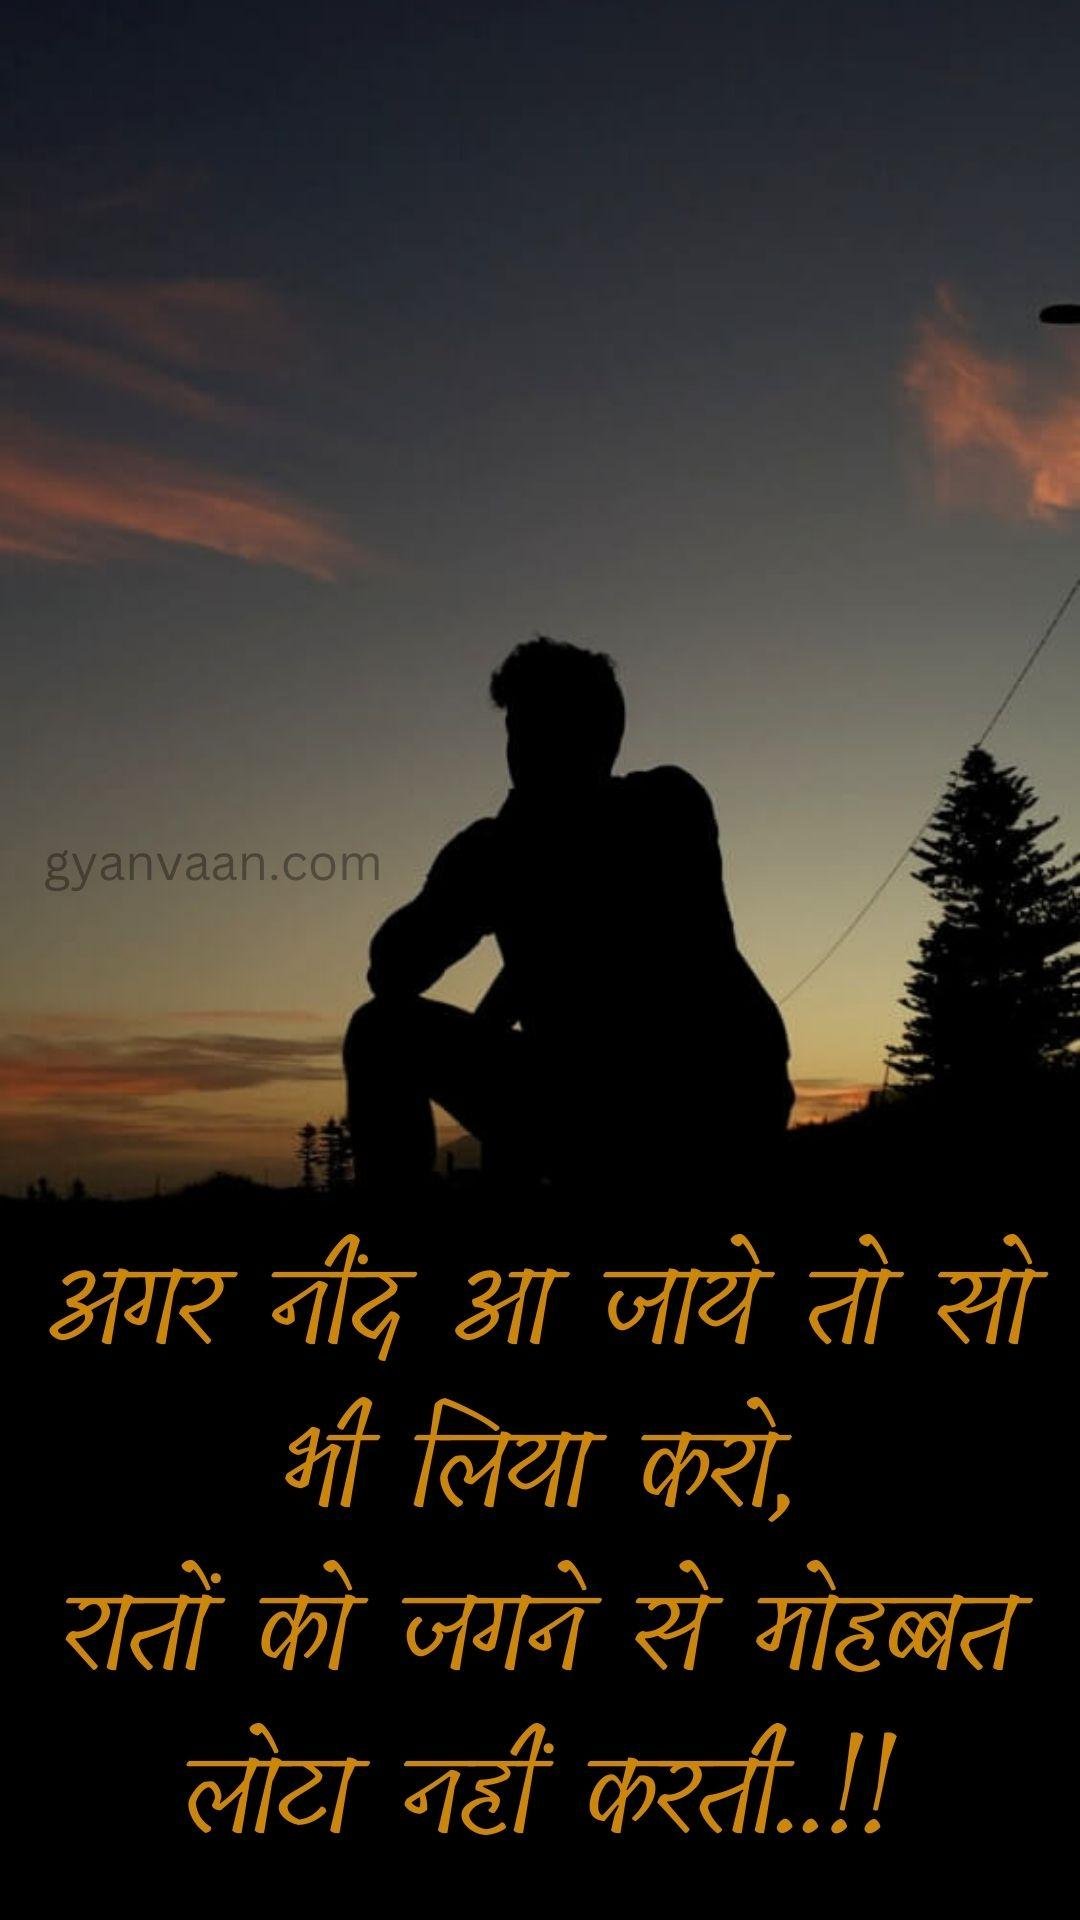 Very Heart Touching Sad Quotes In Hindi For Mobile Devices 7 - Very Heart Touching Sad Quotes In Hindi